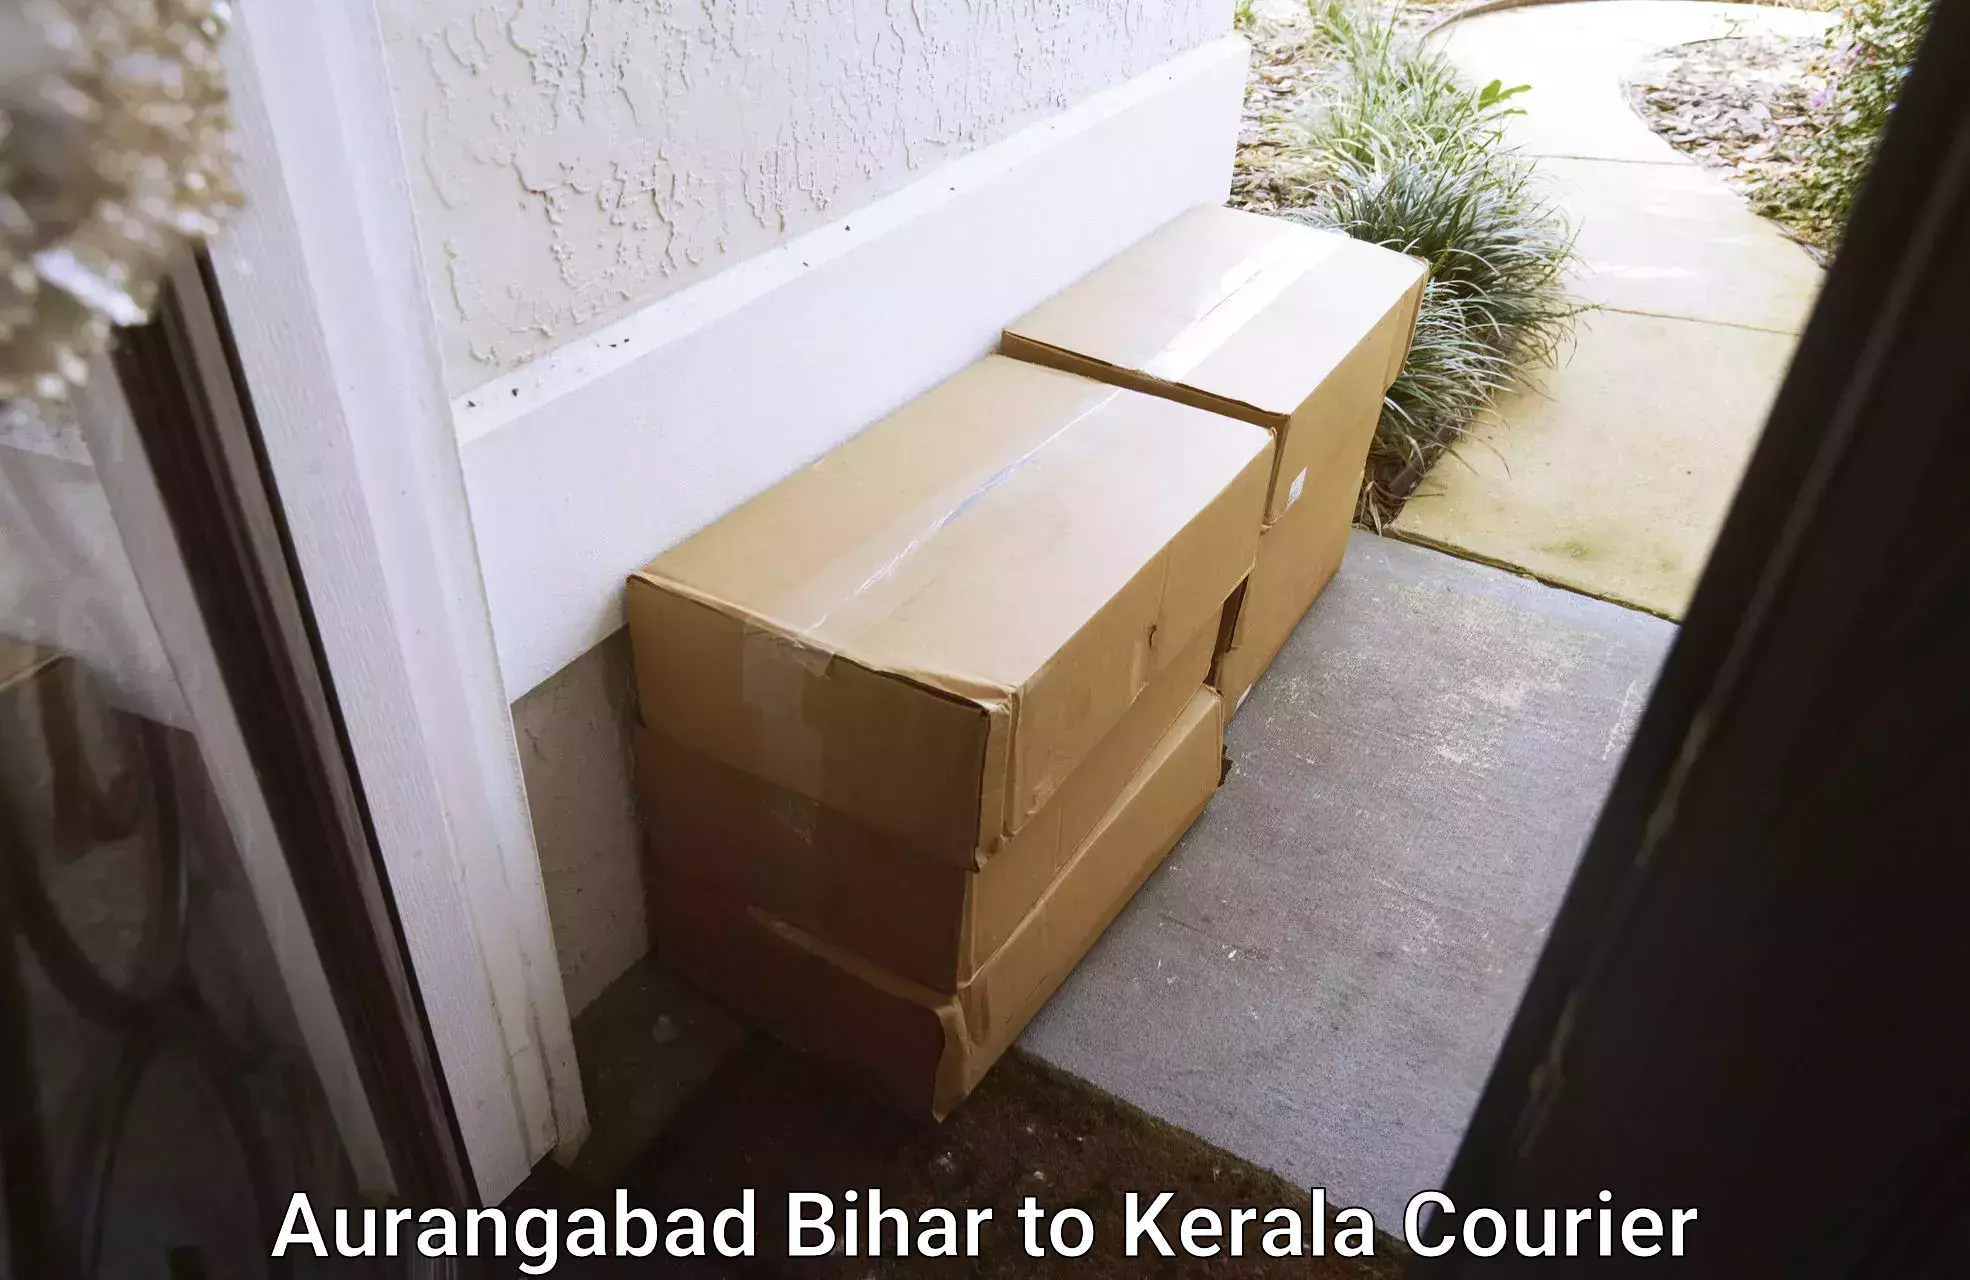 Reliable moving assistance in Aurangabad Bihar to Kerala